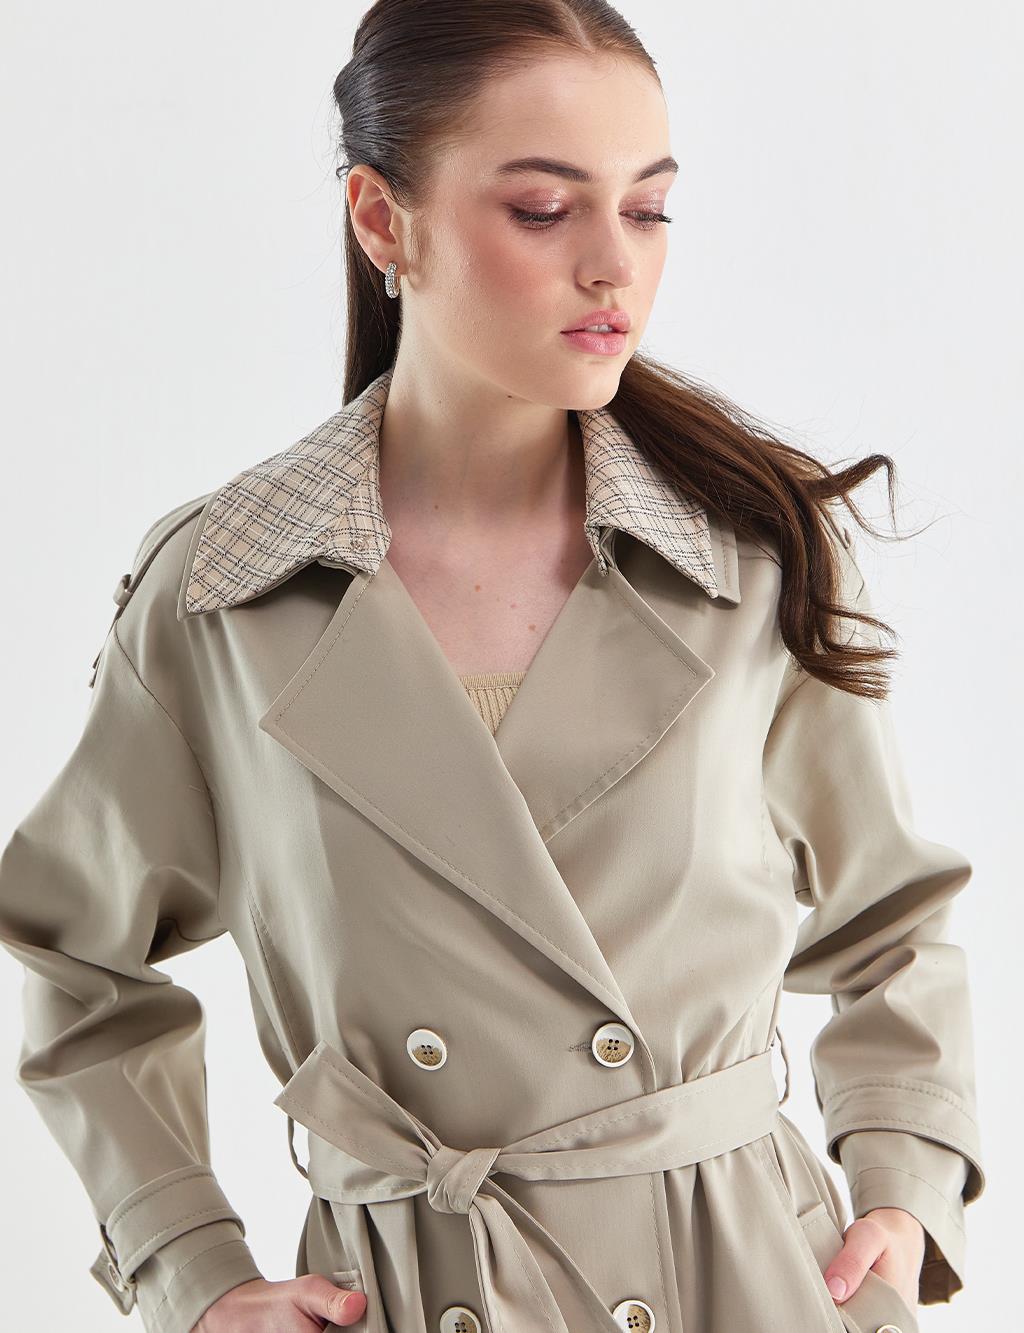 KYR Plaid Lined Double Breasted Trench Coat Cream